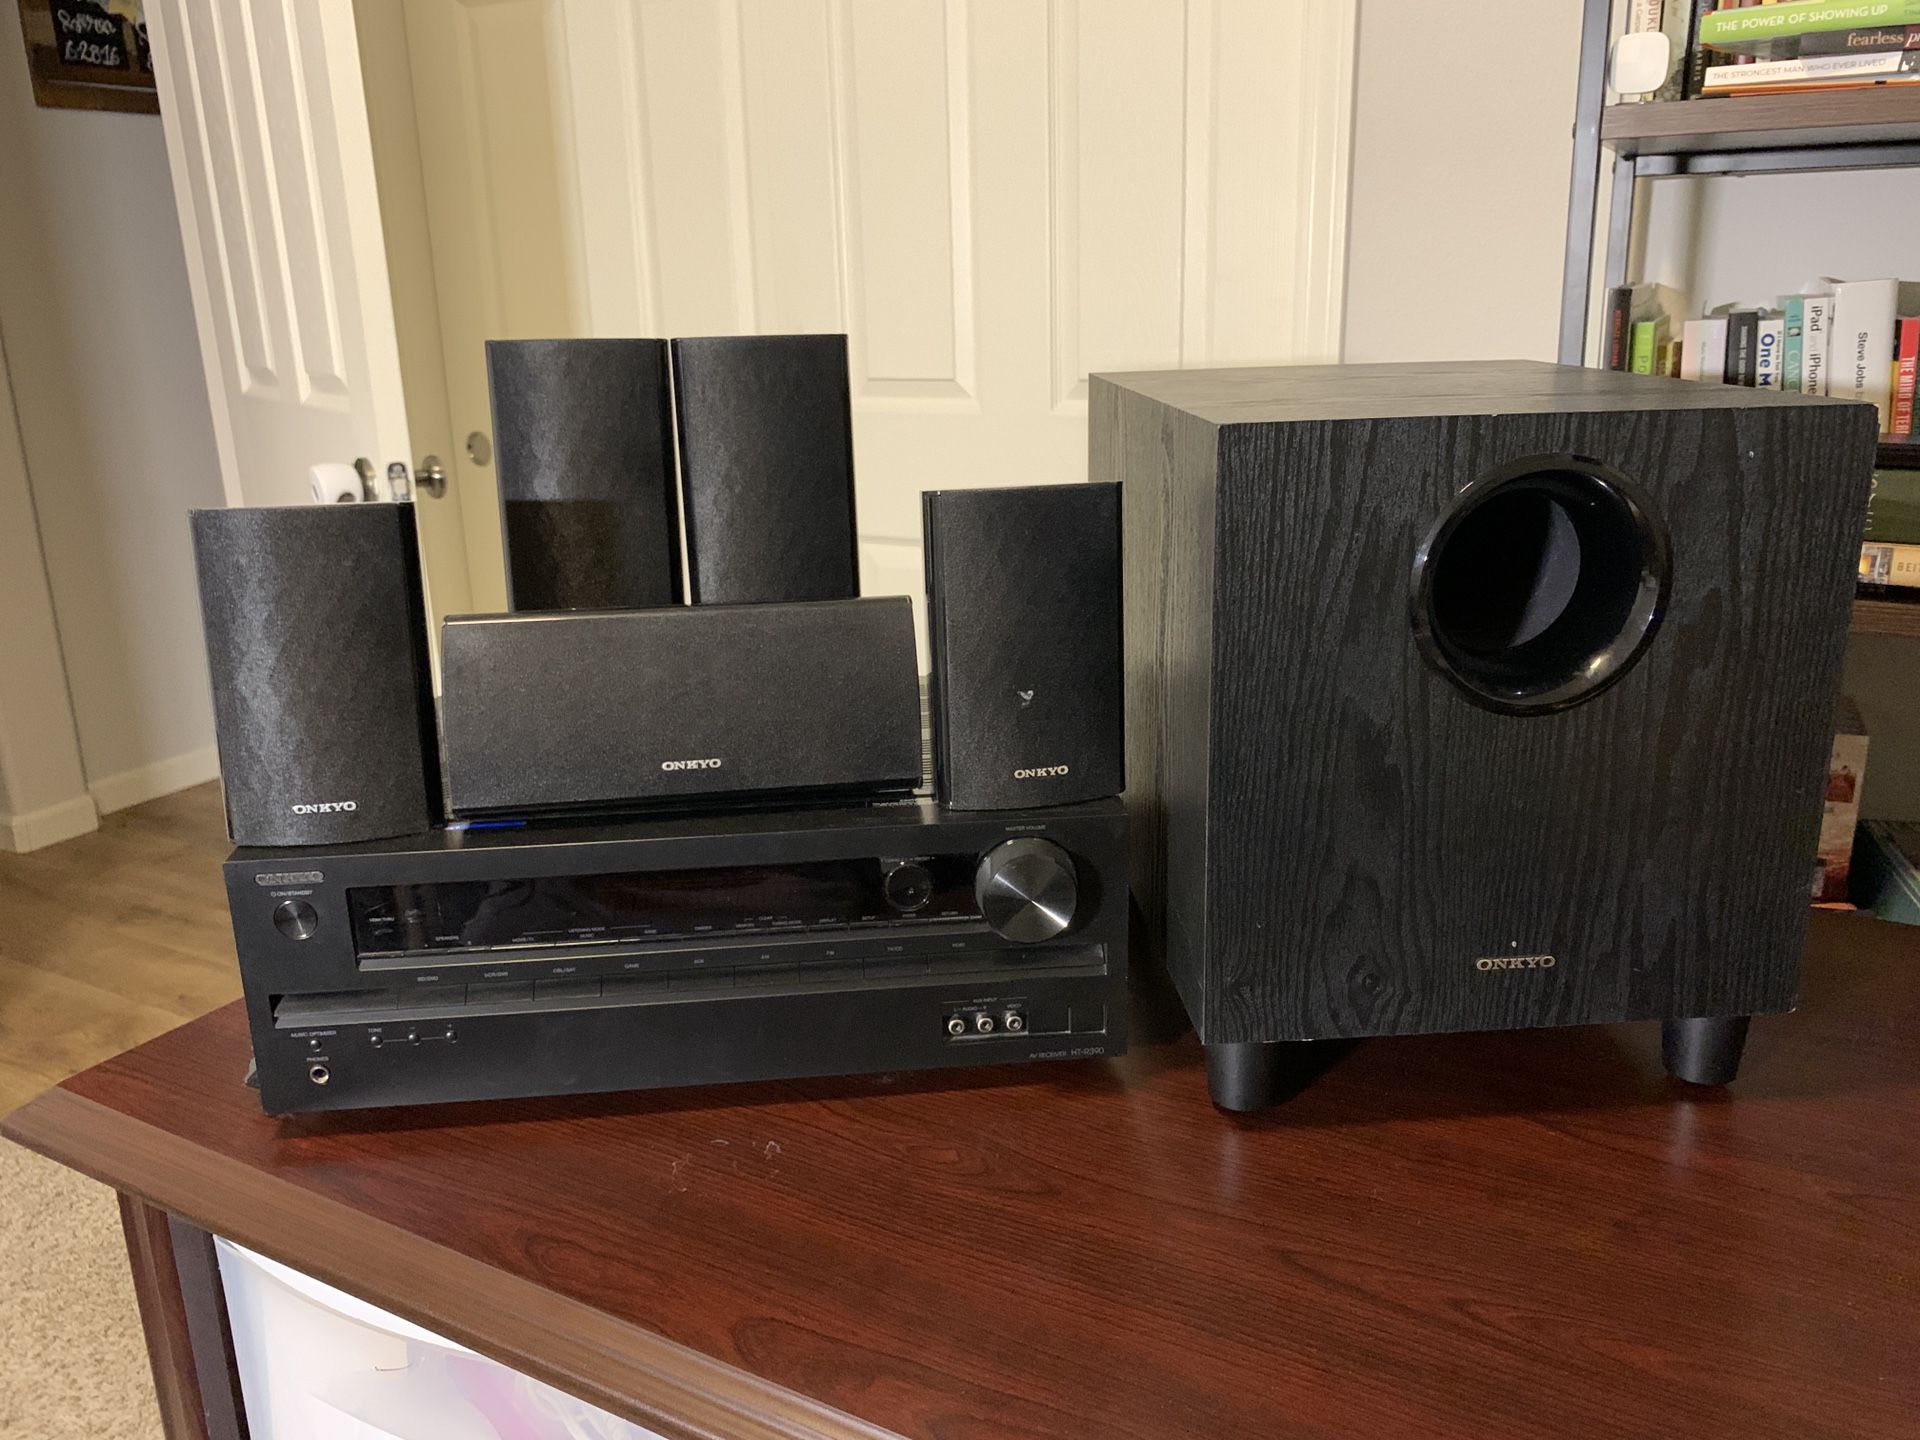 Onkyo HT-R390 5.1 receiver and speakers